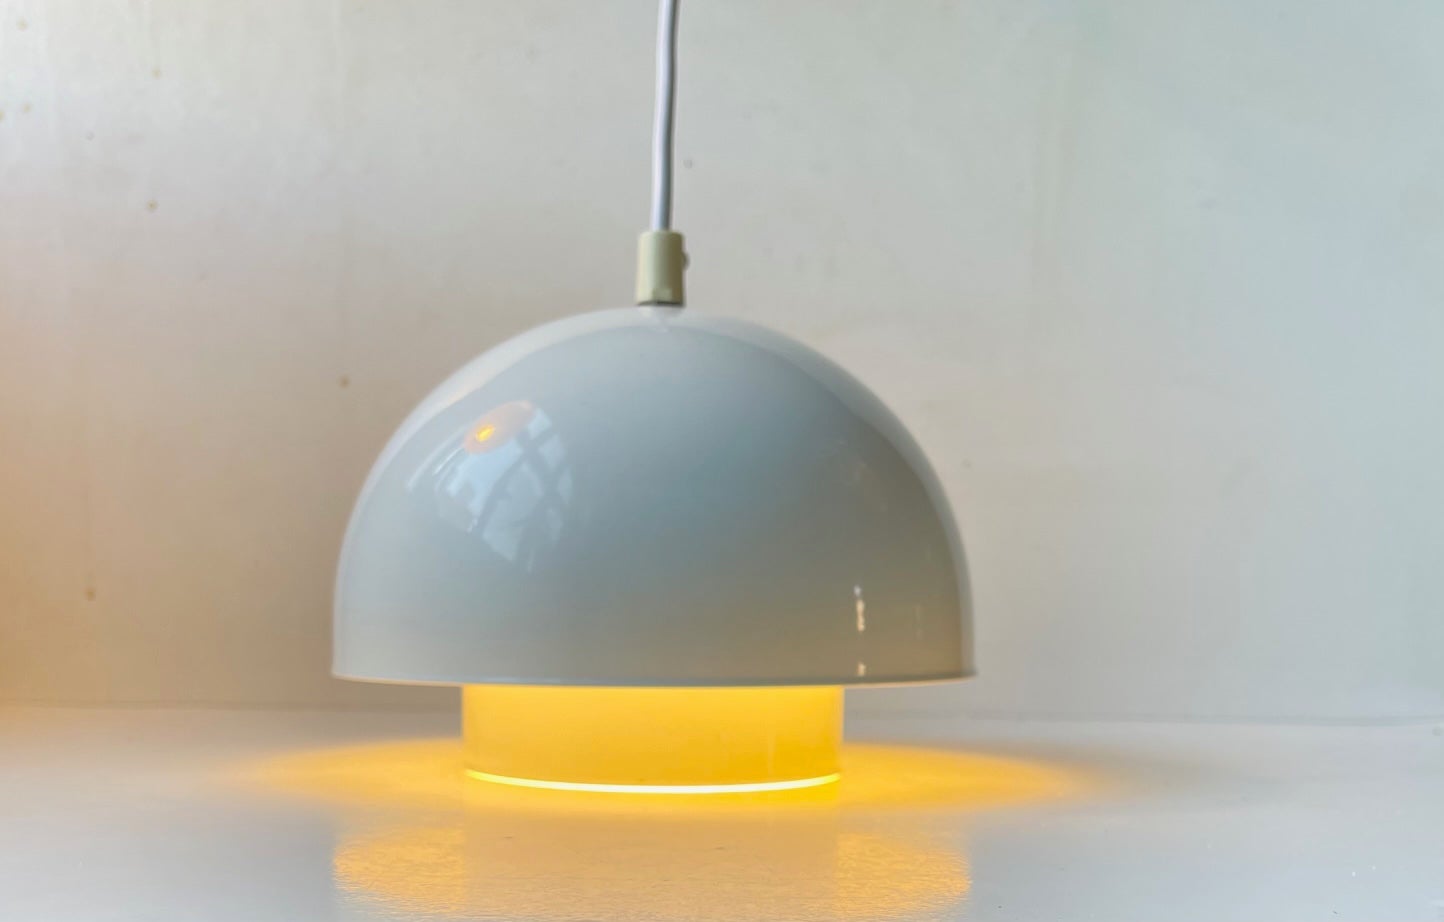 NOS - New old stock/never installed nor used mushroom ceiling light from Fog & Morup. Its made from white enameled steel. Measurements: diameter: 20 cm, height: 17 cm.